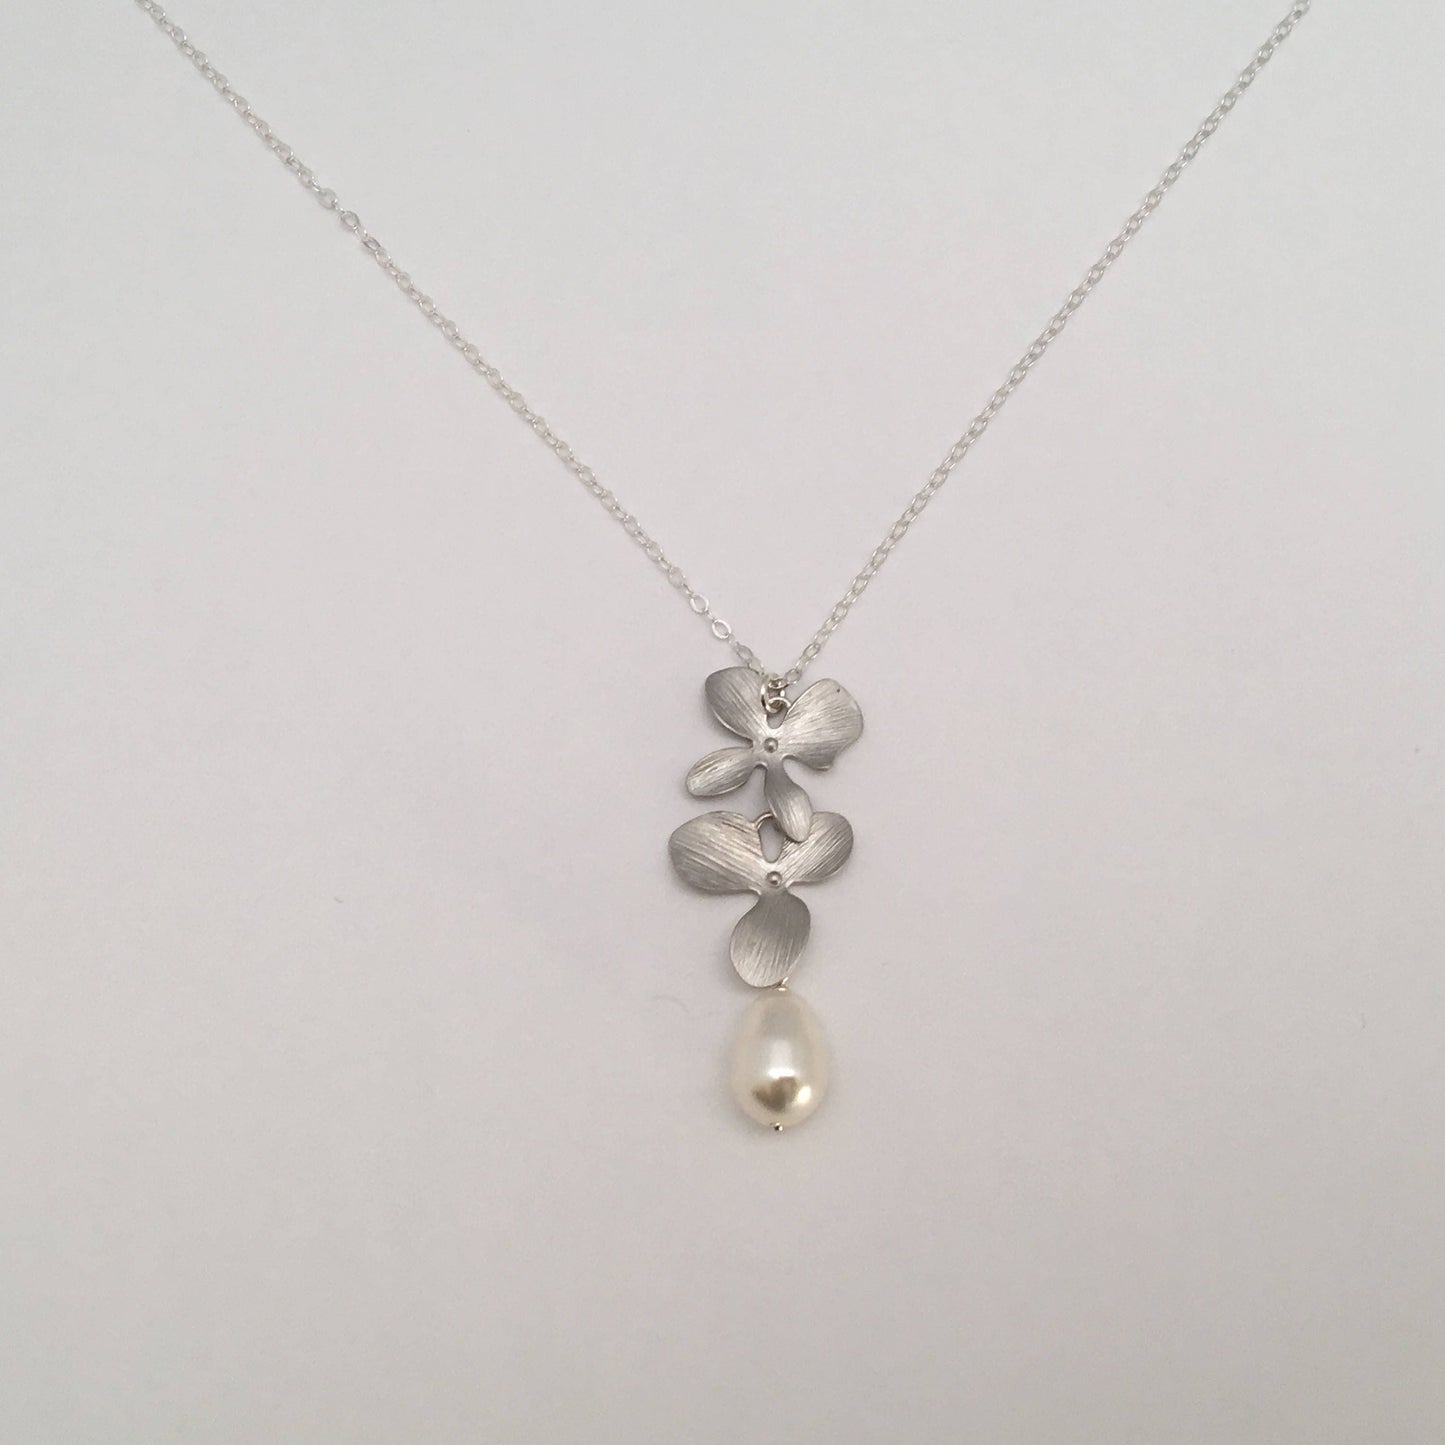 Silver Orchid necklace with tear drop pearl, mothers gift, bridal jewelry, gift for her, wedding jewelry